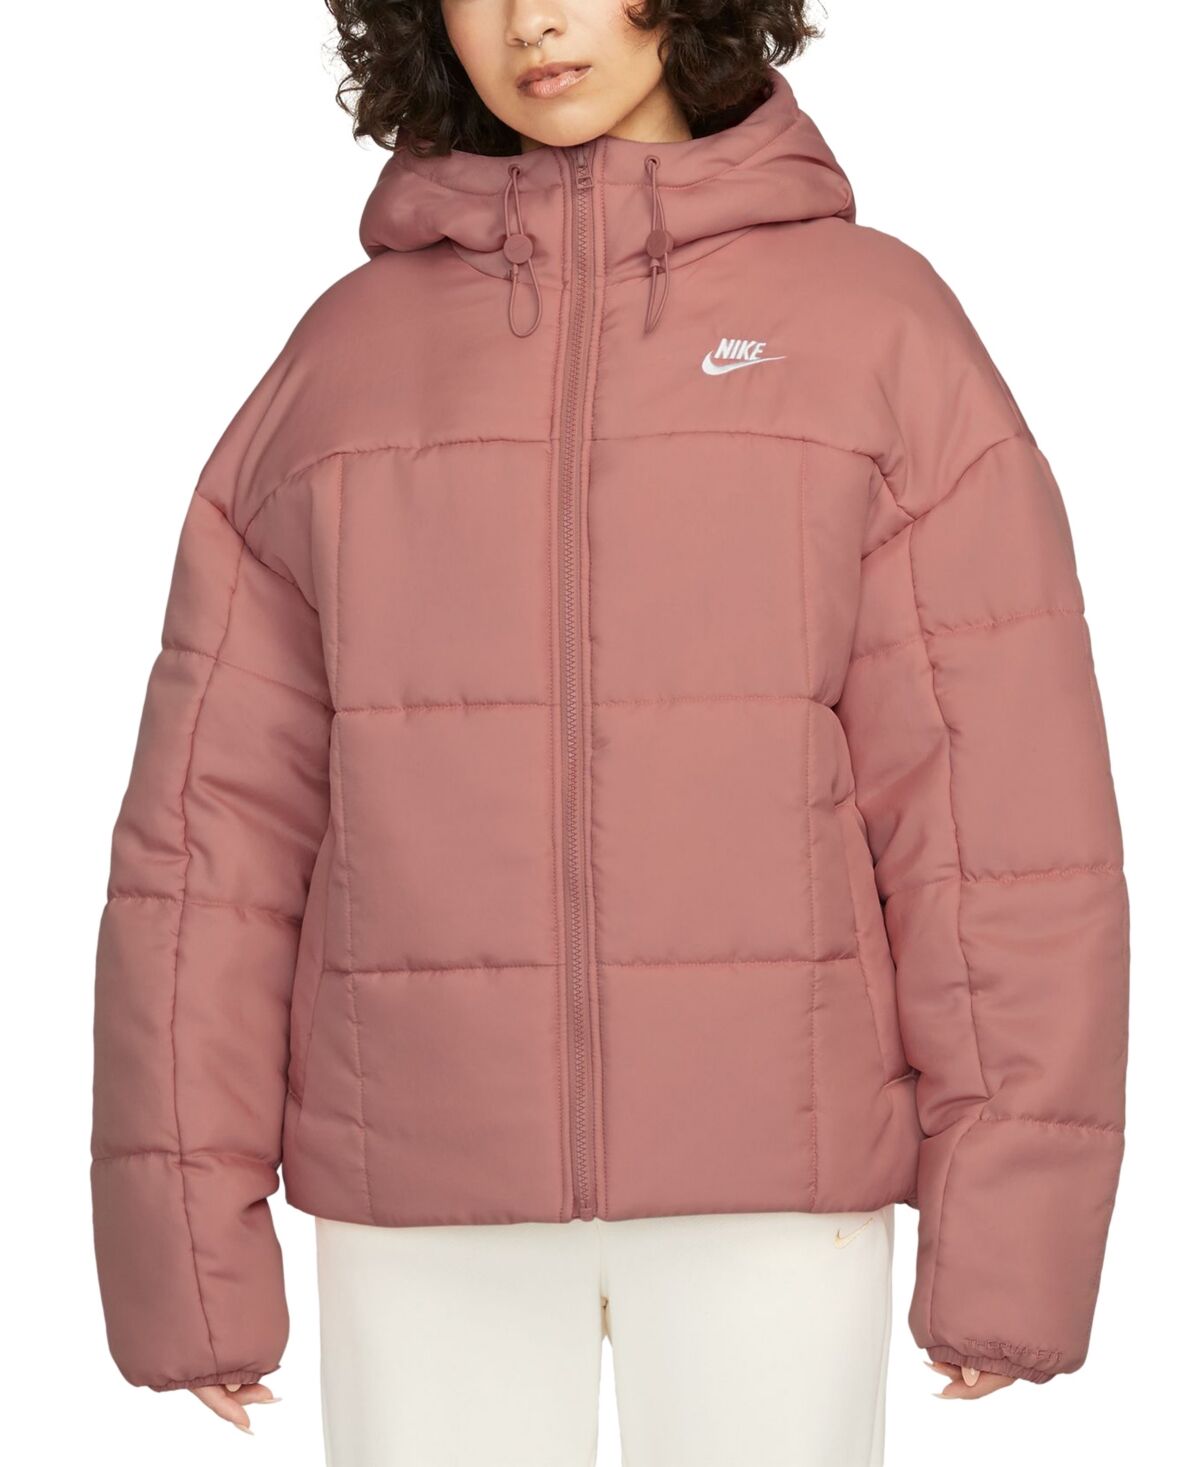 Nike Sportswear Women's Therma-fit Essentials Puffer Jacket - Red Stardust/white